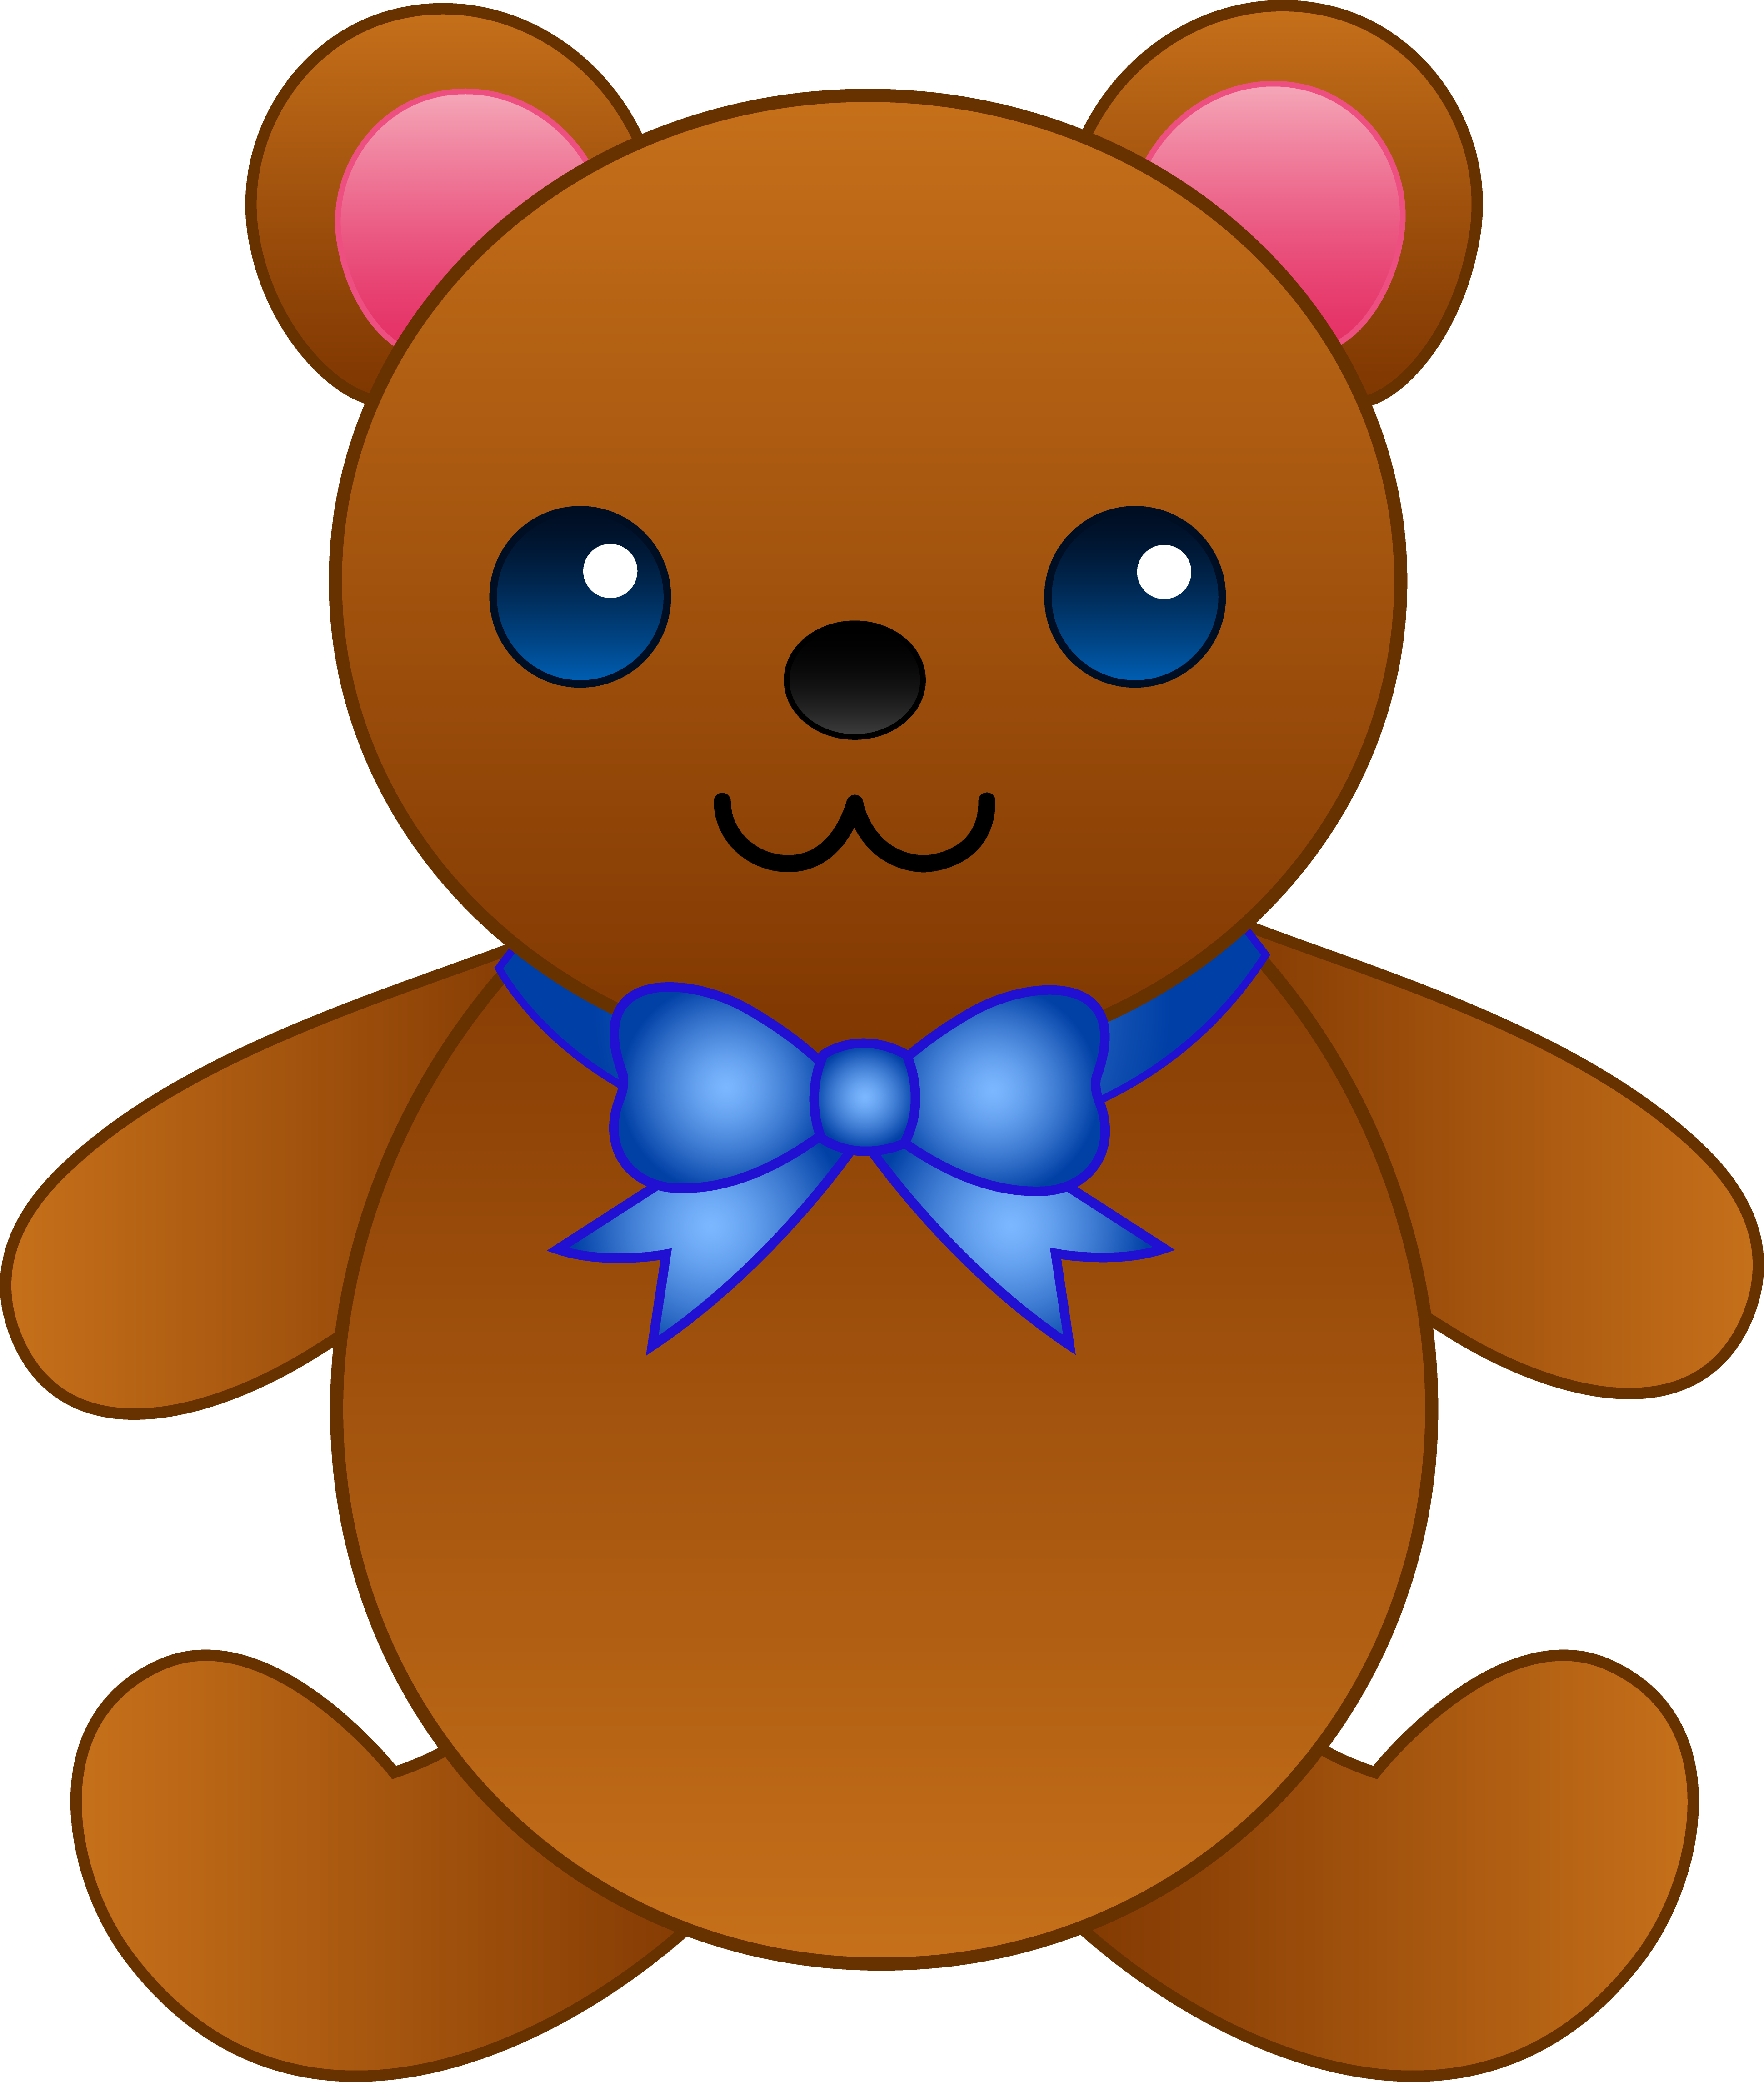 Images For > Teddy Bear Cartoon Images